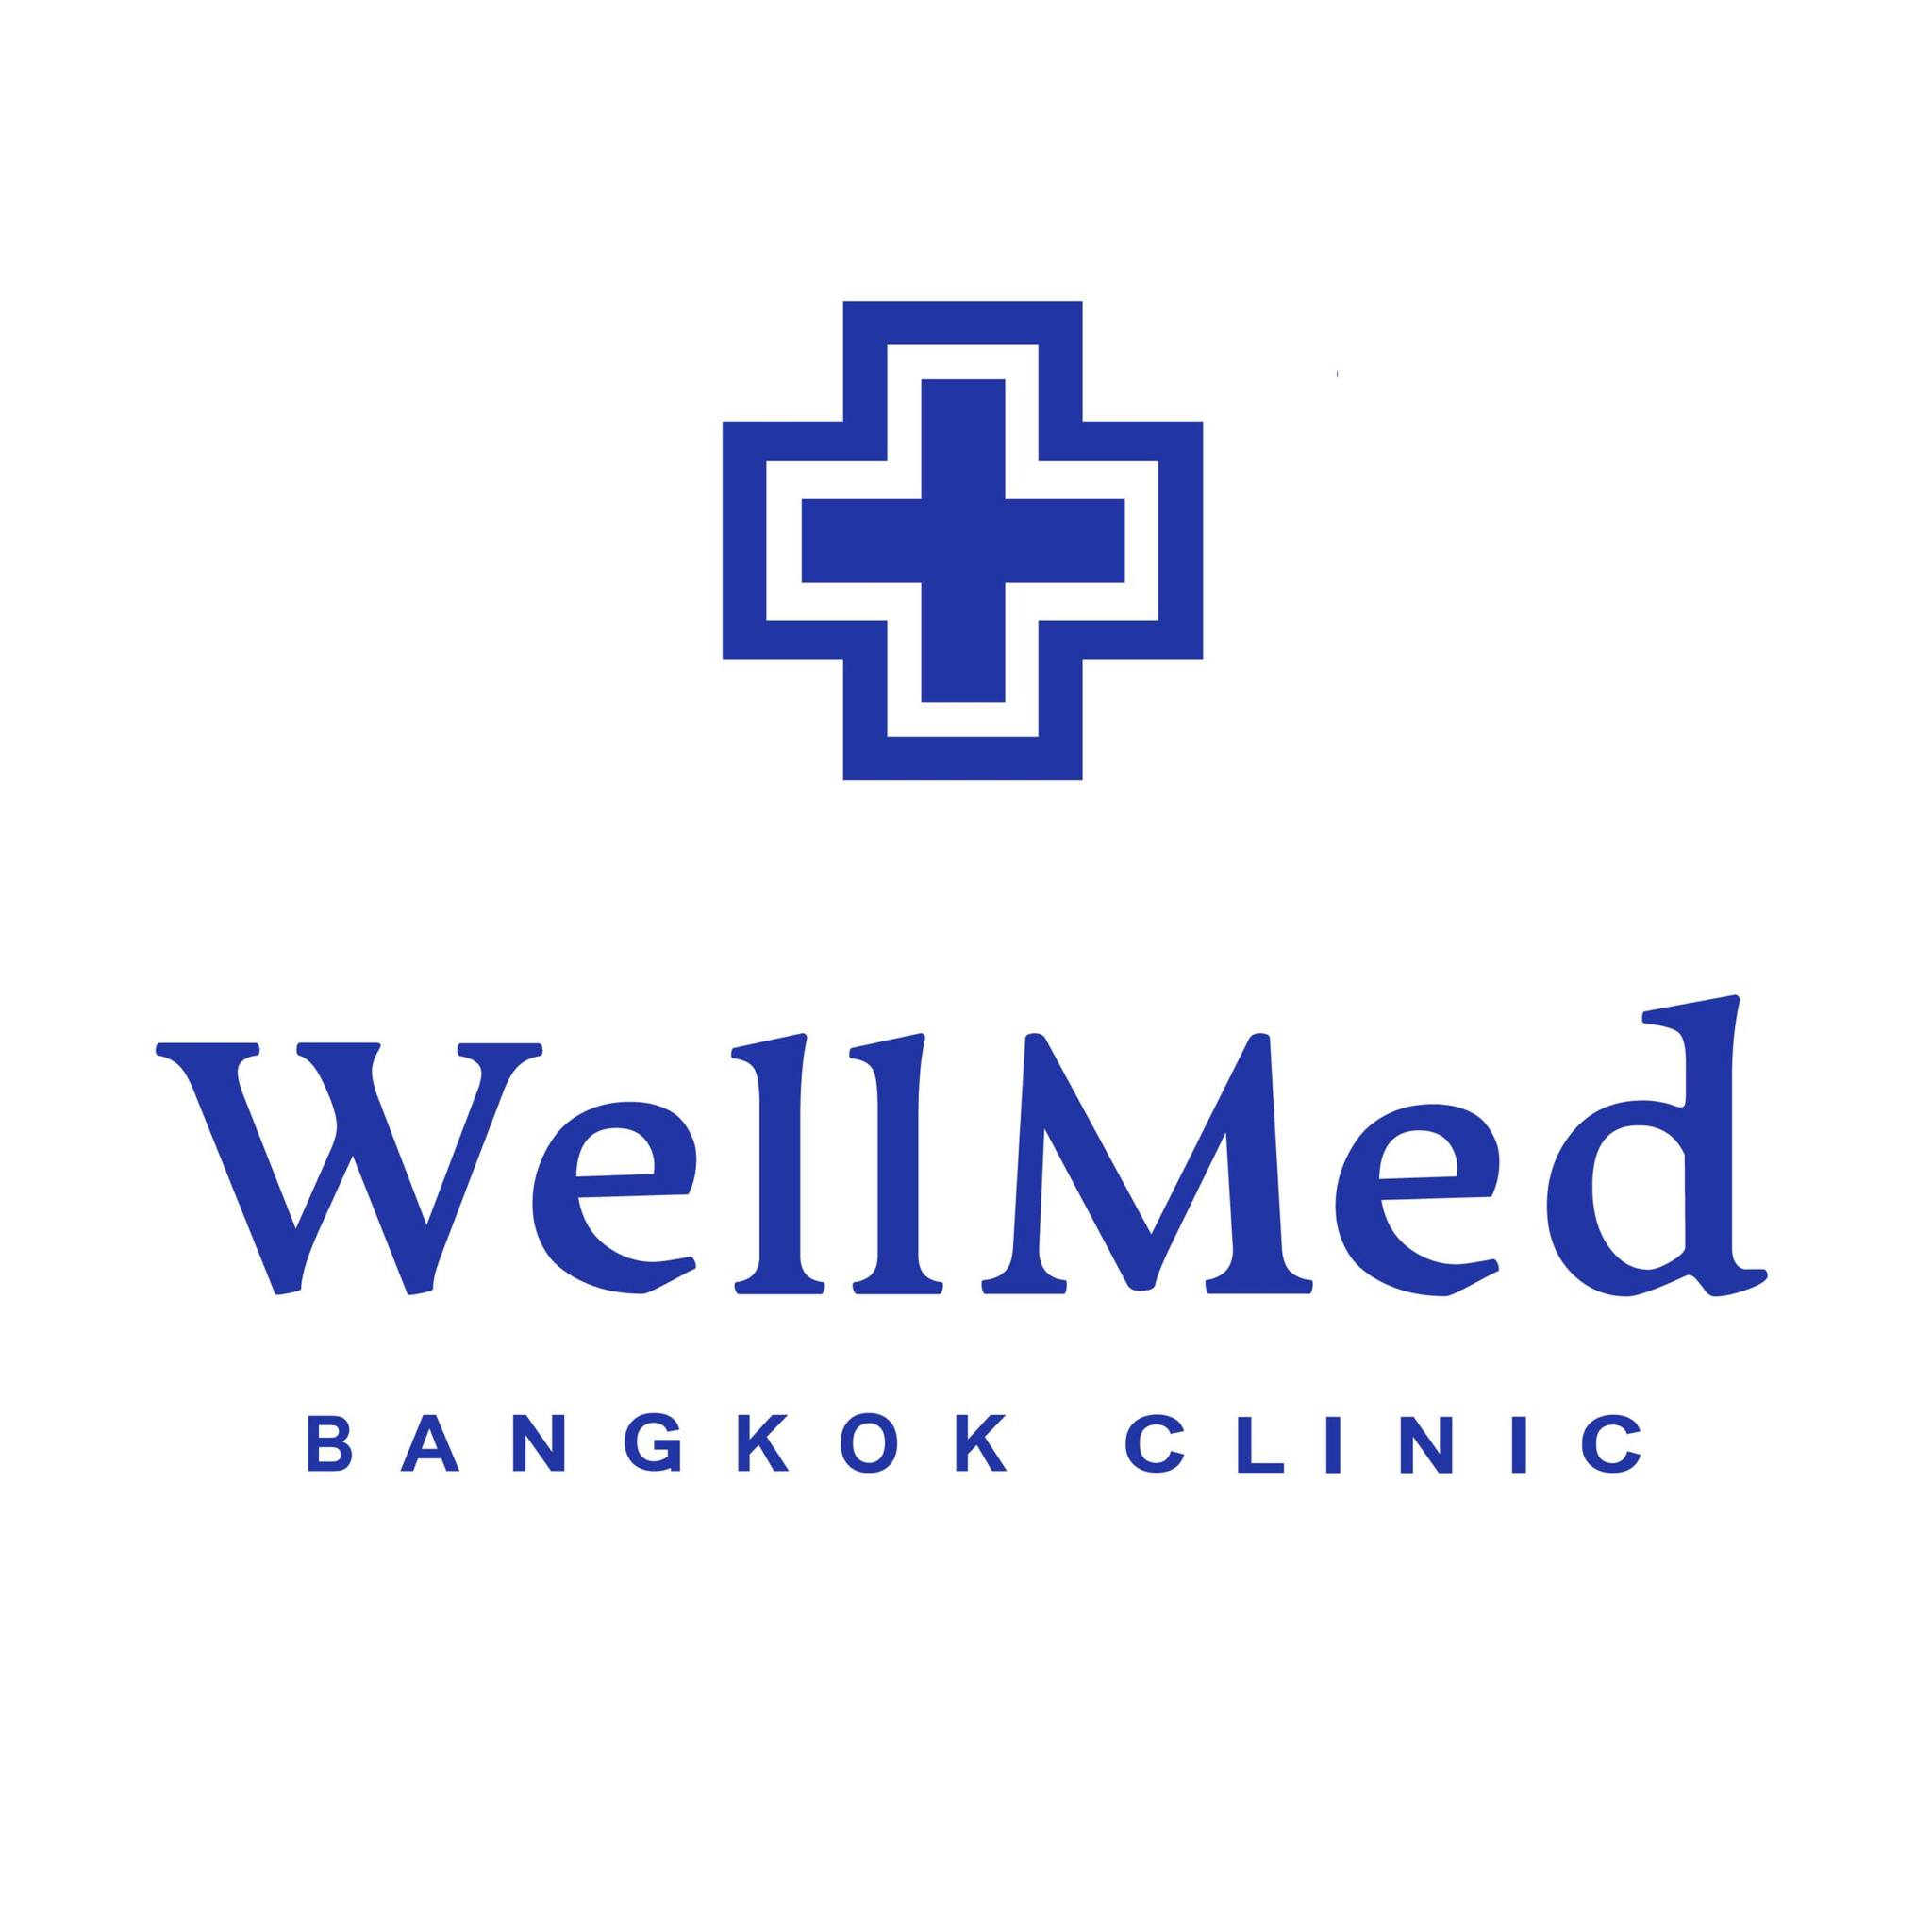 WellMed Medical clinic